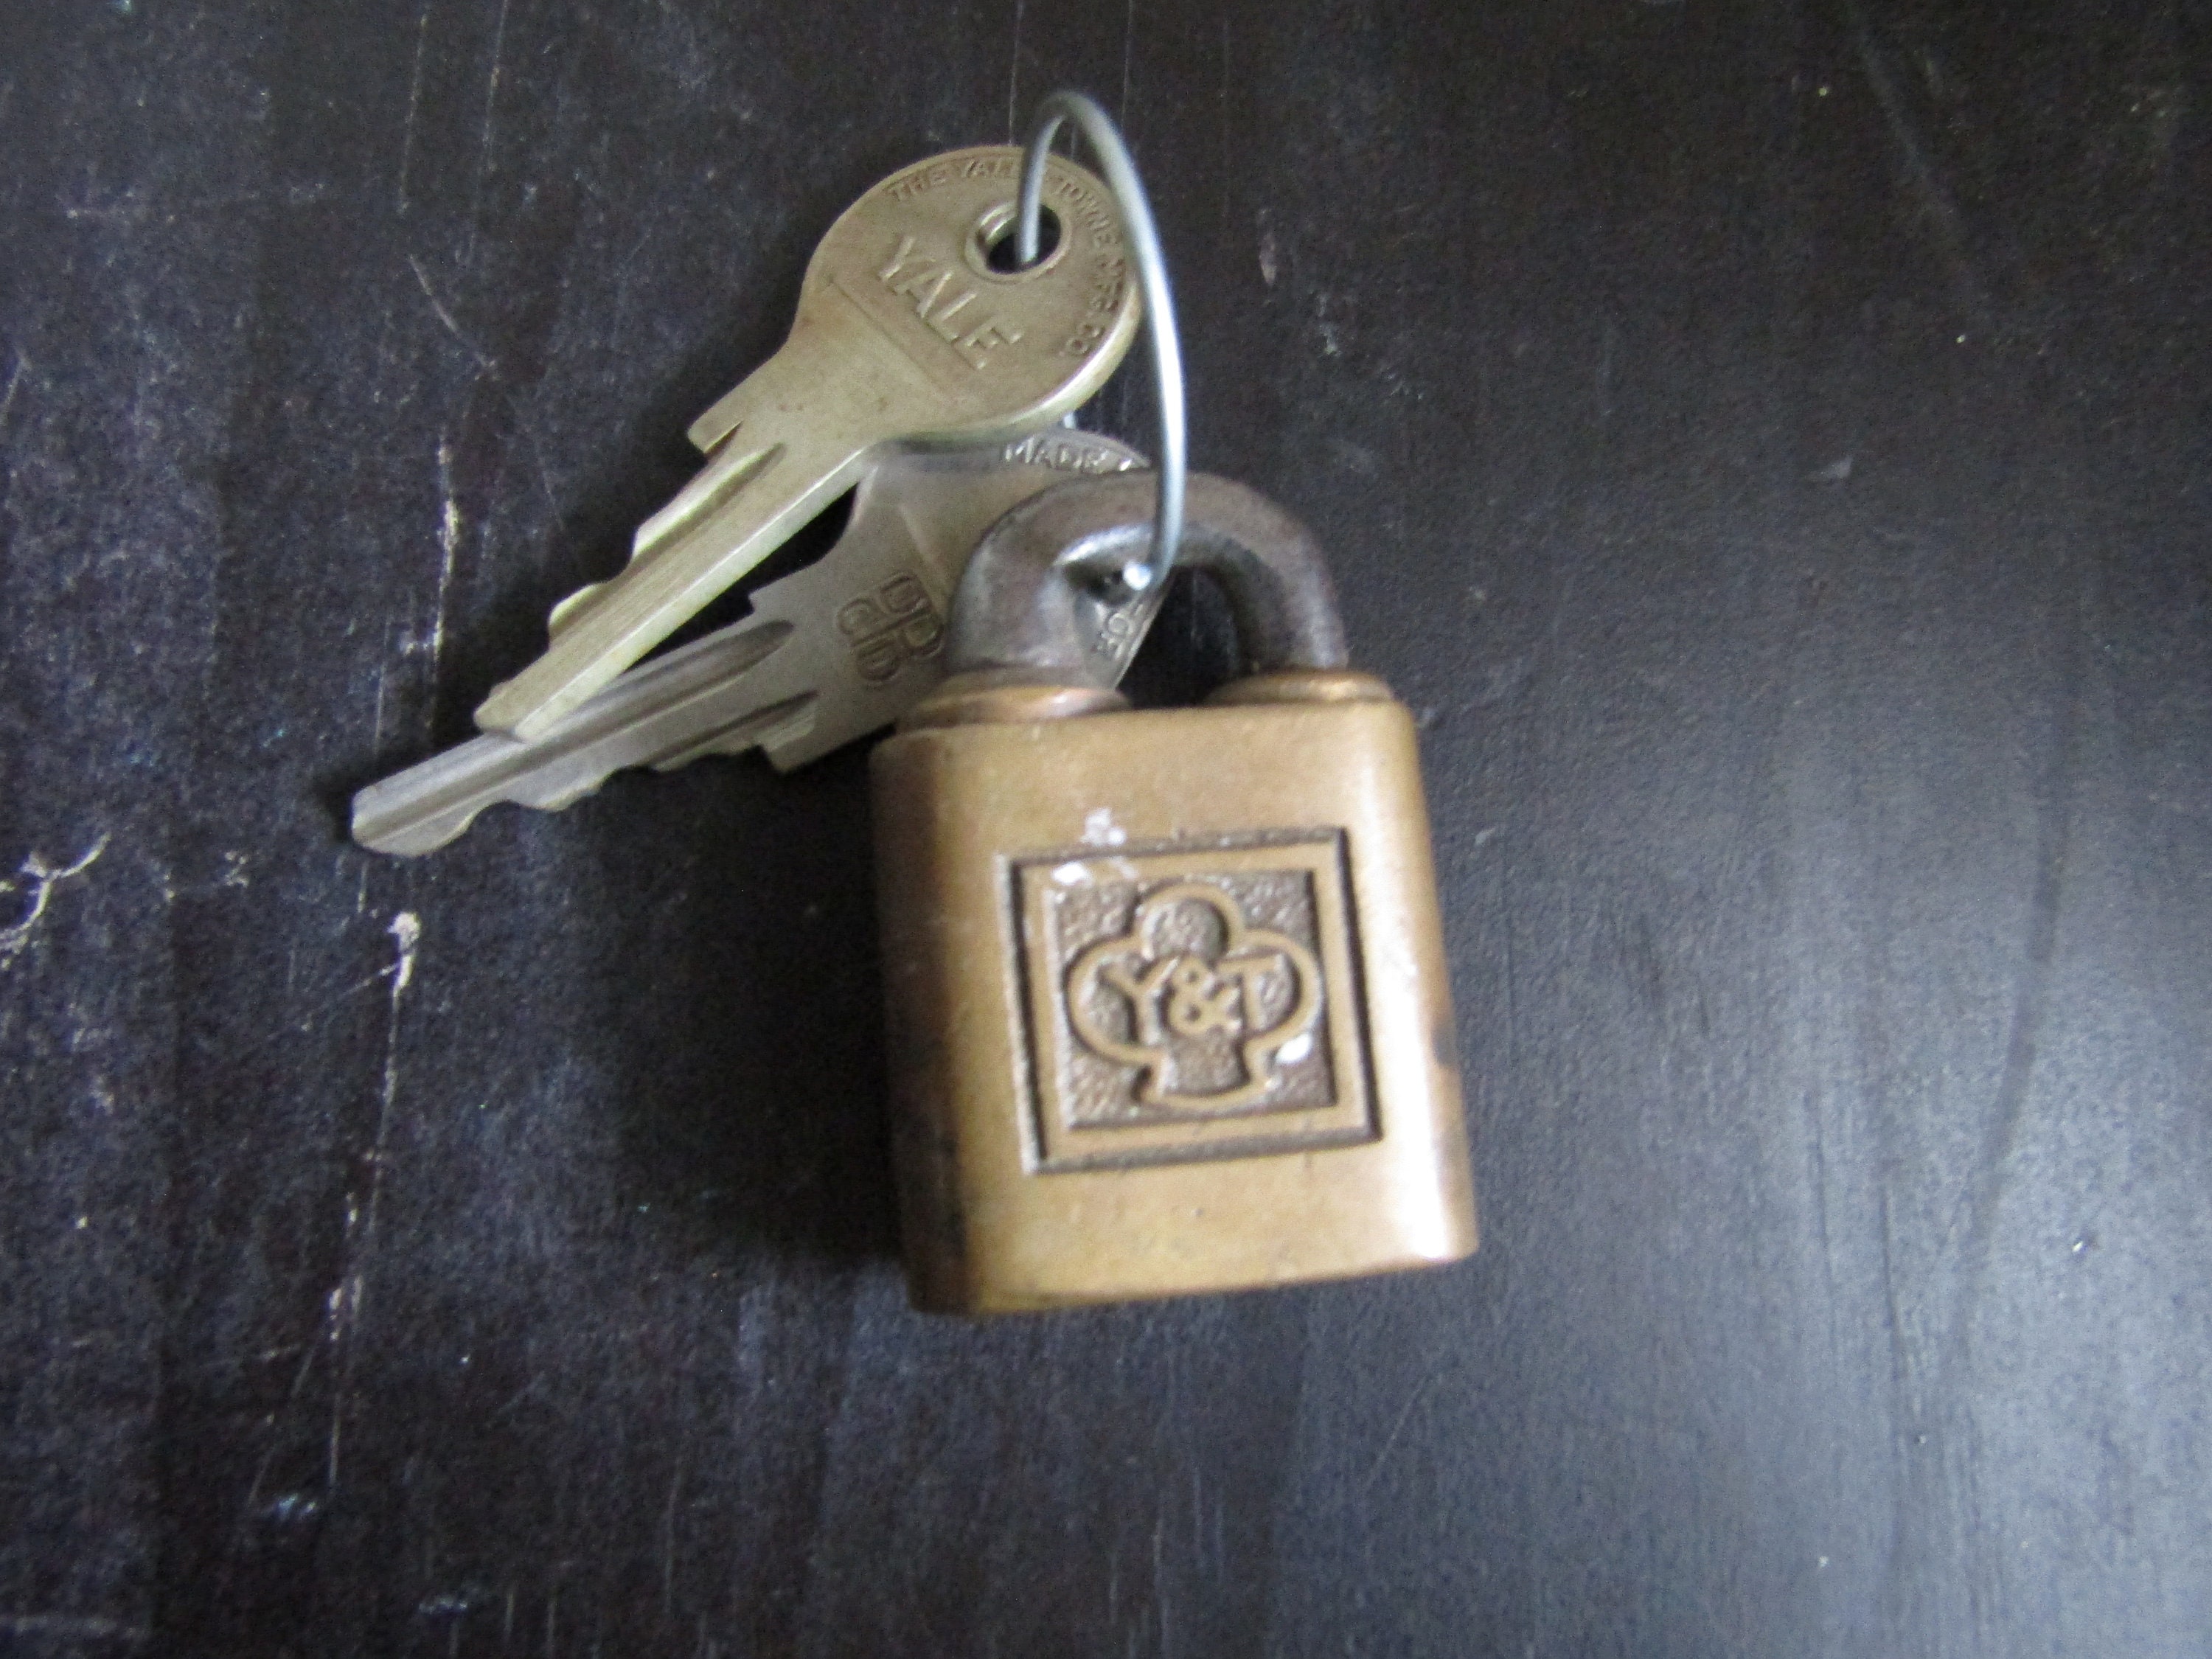 Vintage Switch Lock With Key Y&T Yale and Towne Brass PRR 